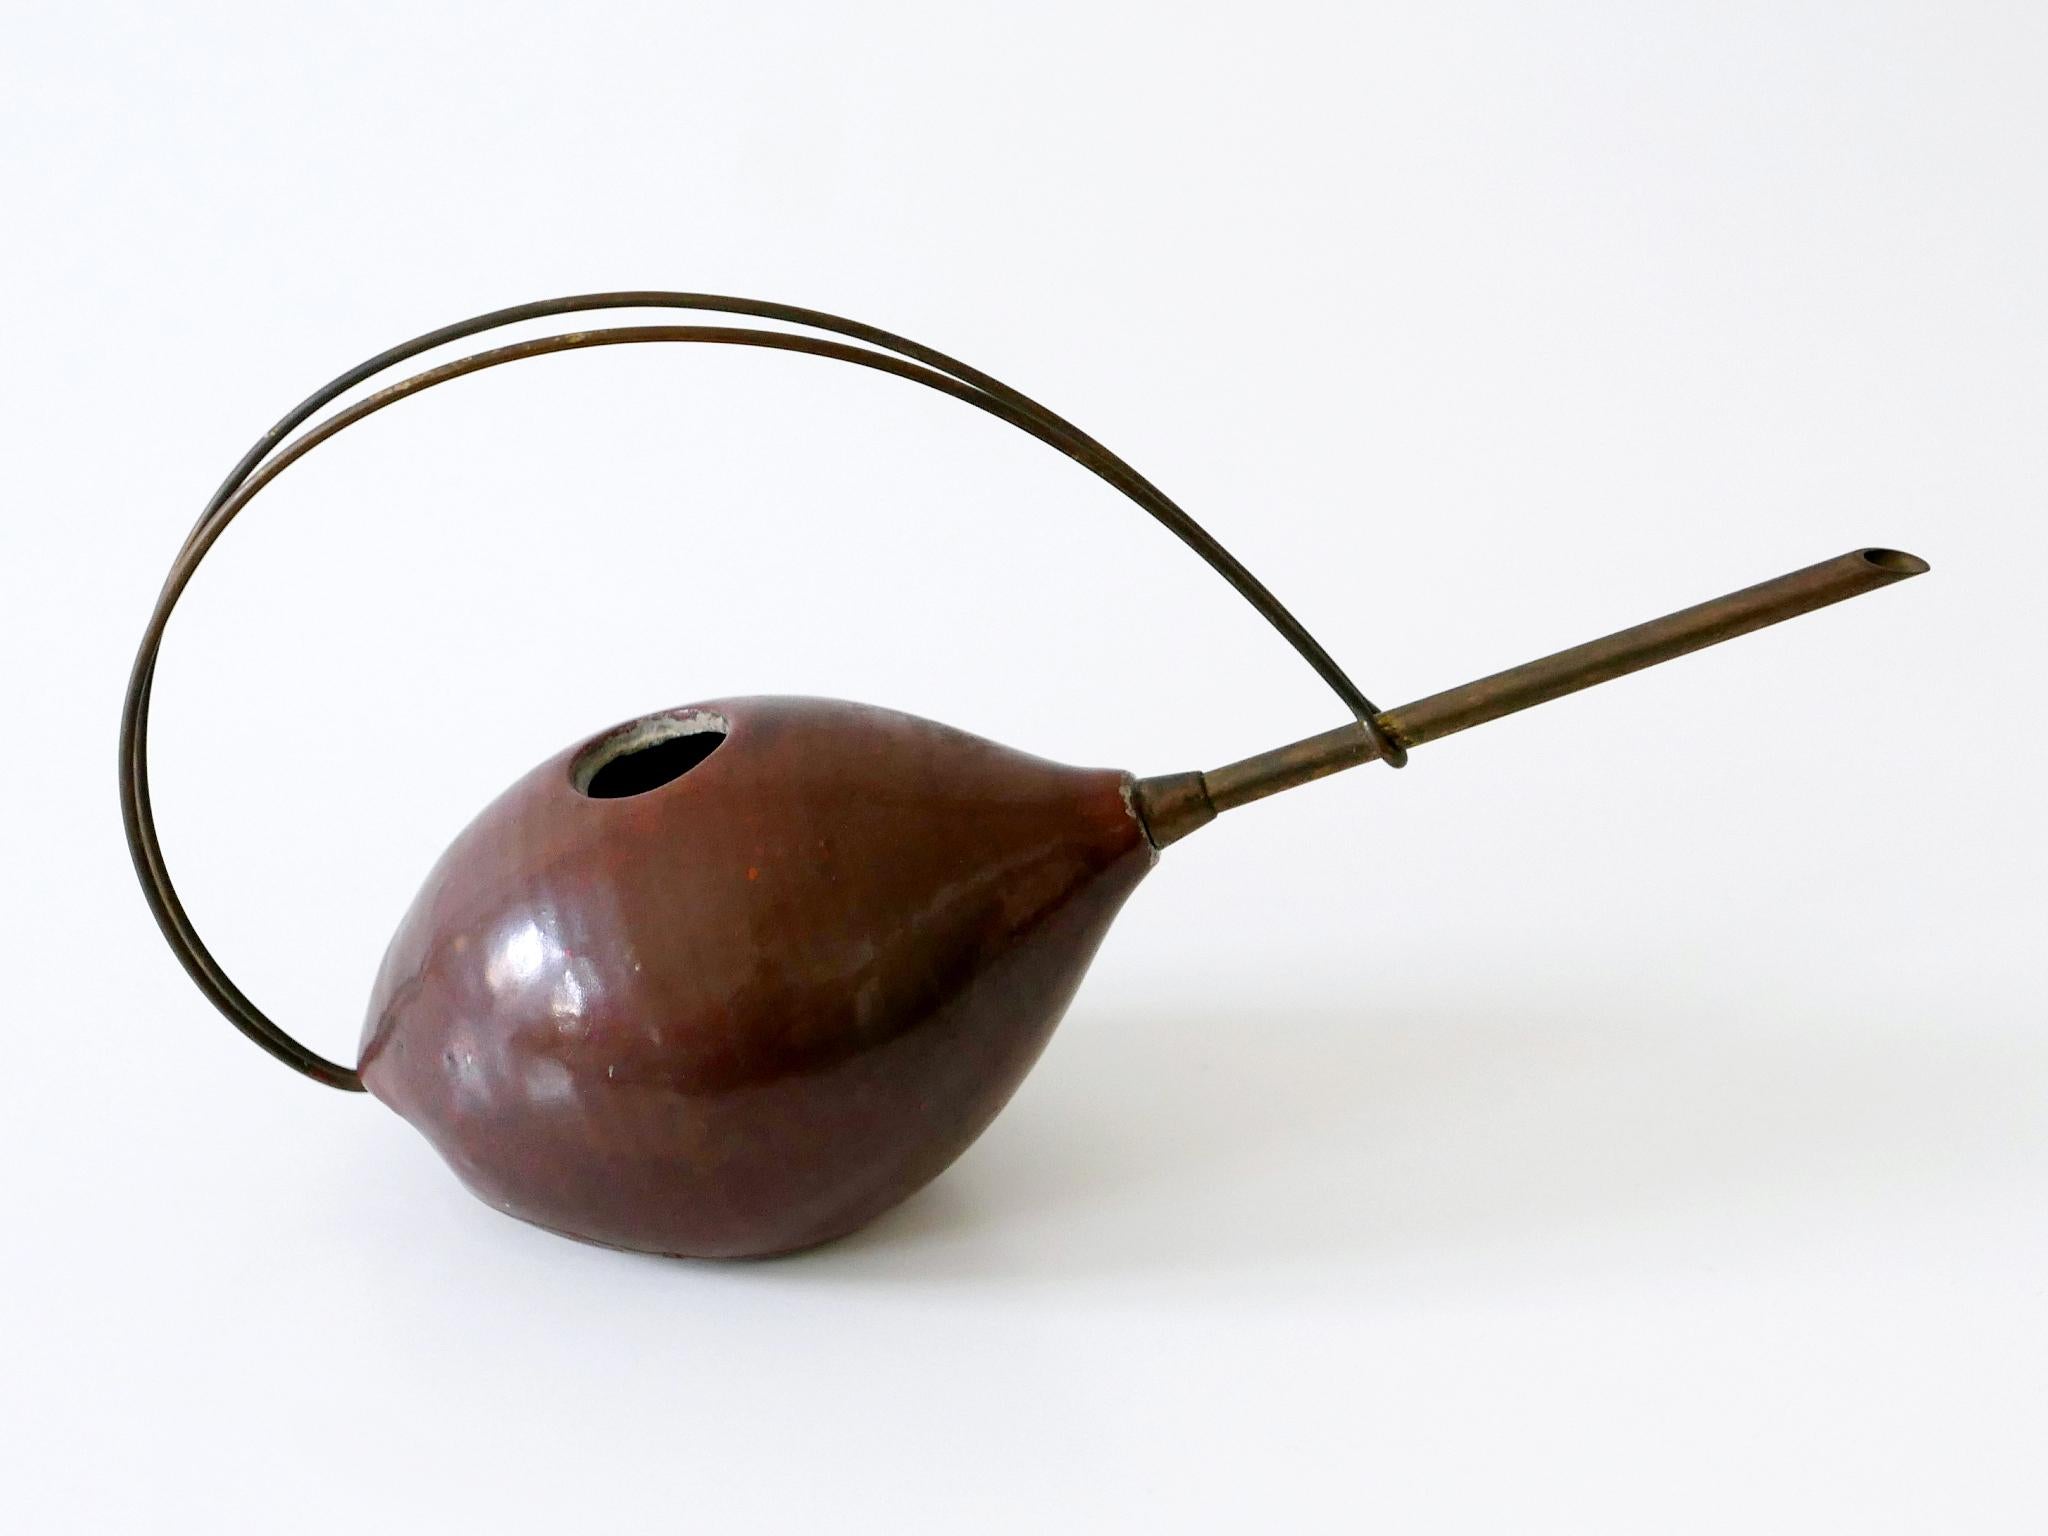 Mid-20th Century Lovely Mid-Century Modern Ceramic and Brass Watering Can, 1950s, Germany For Sale